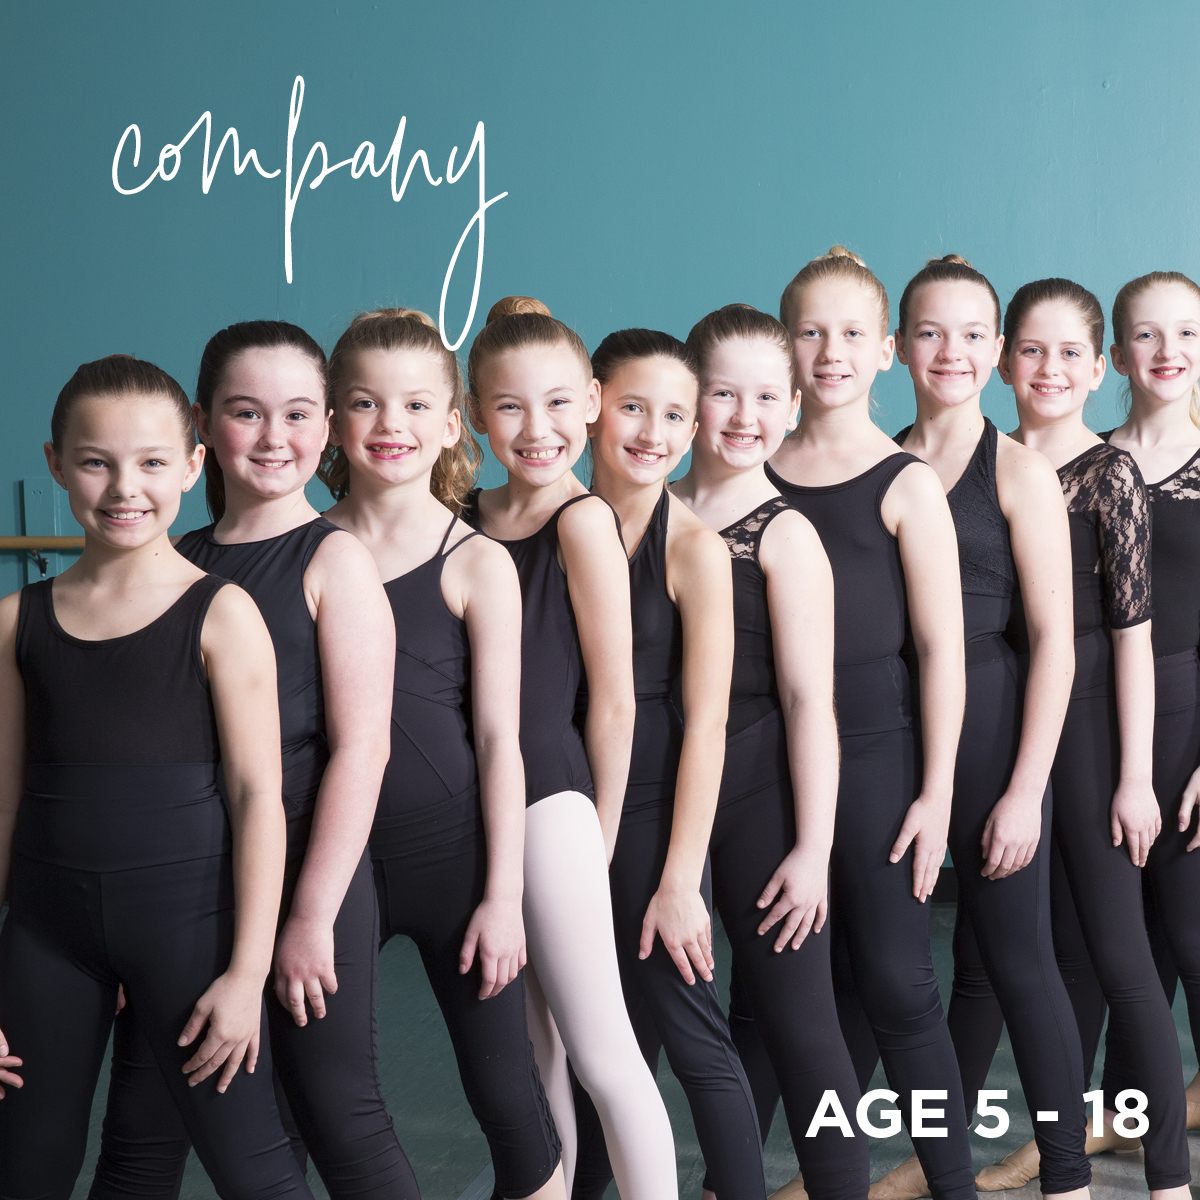 Velocity Dance Team Company - Ages 5-18